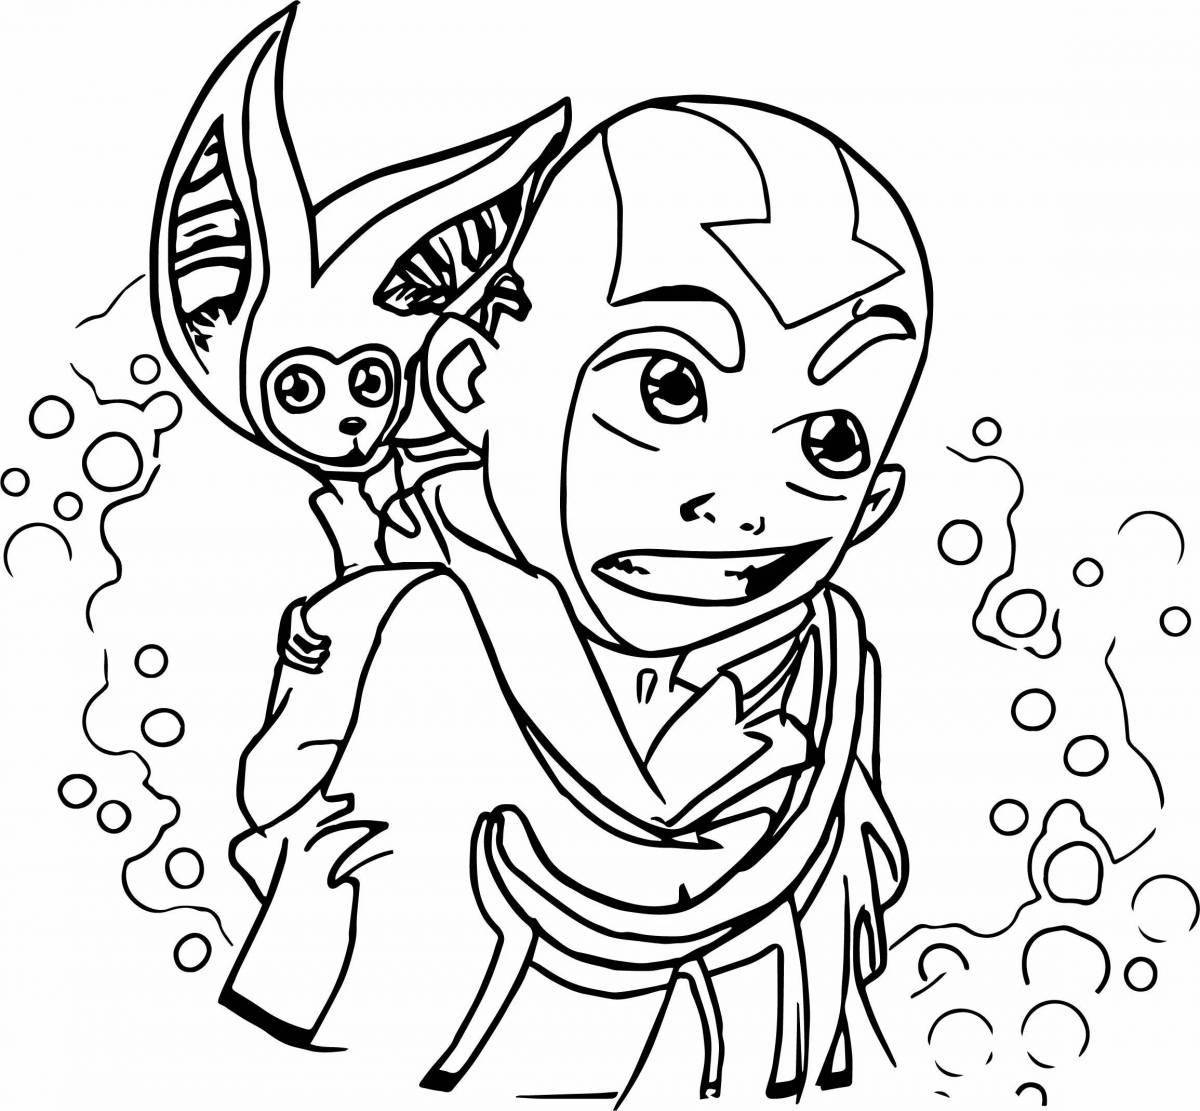 Calming waterway avatar coloring page